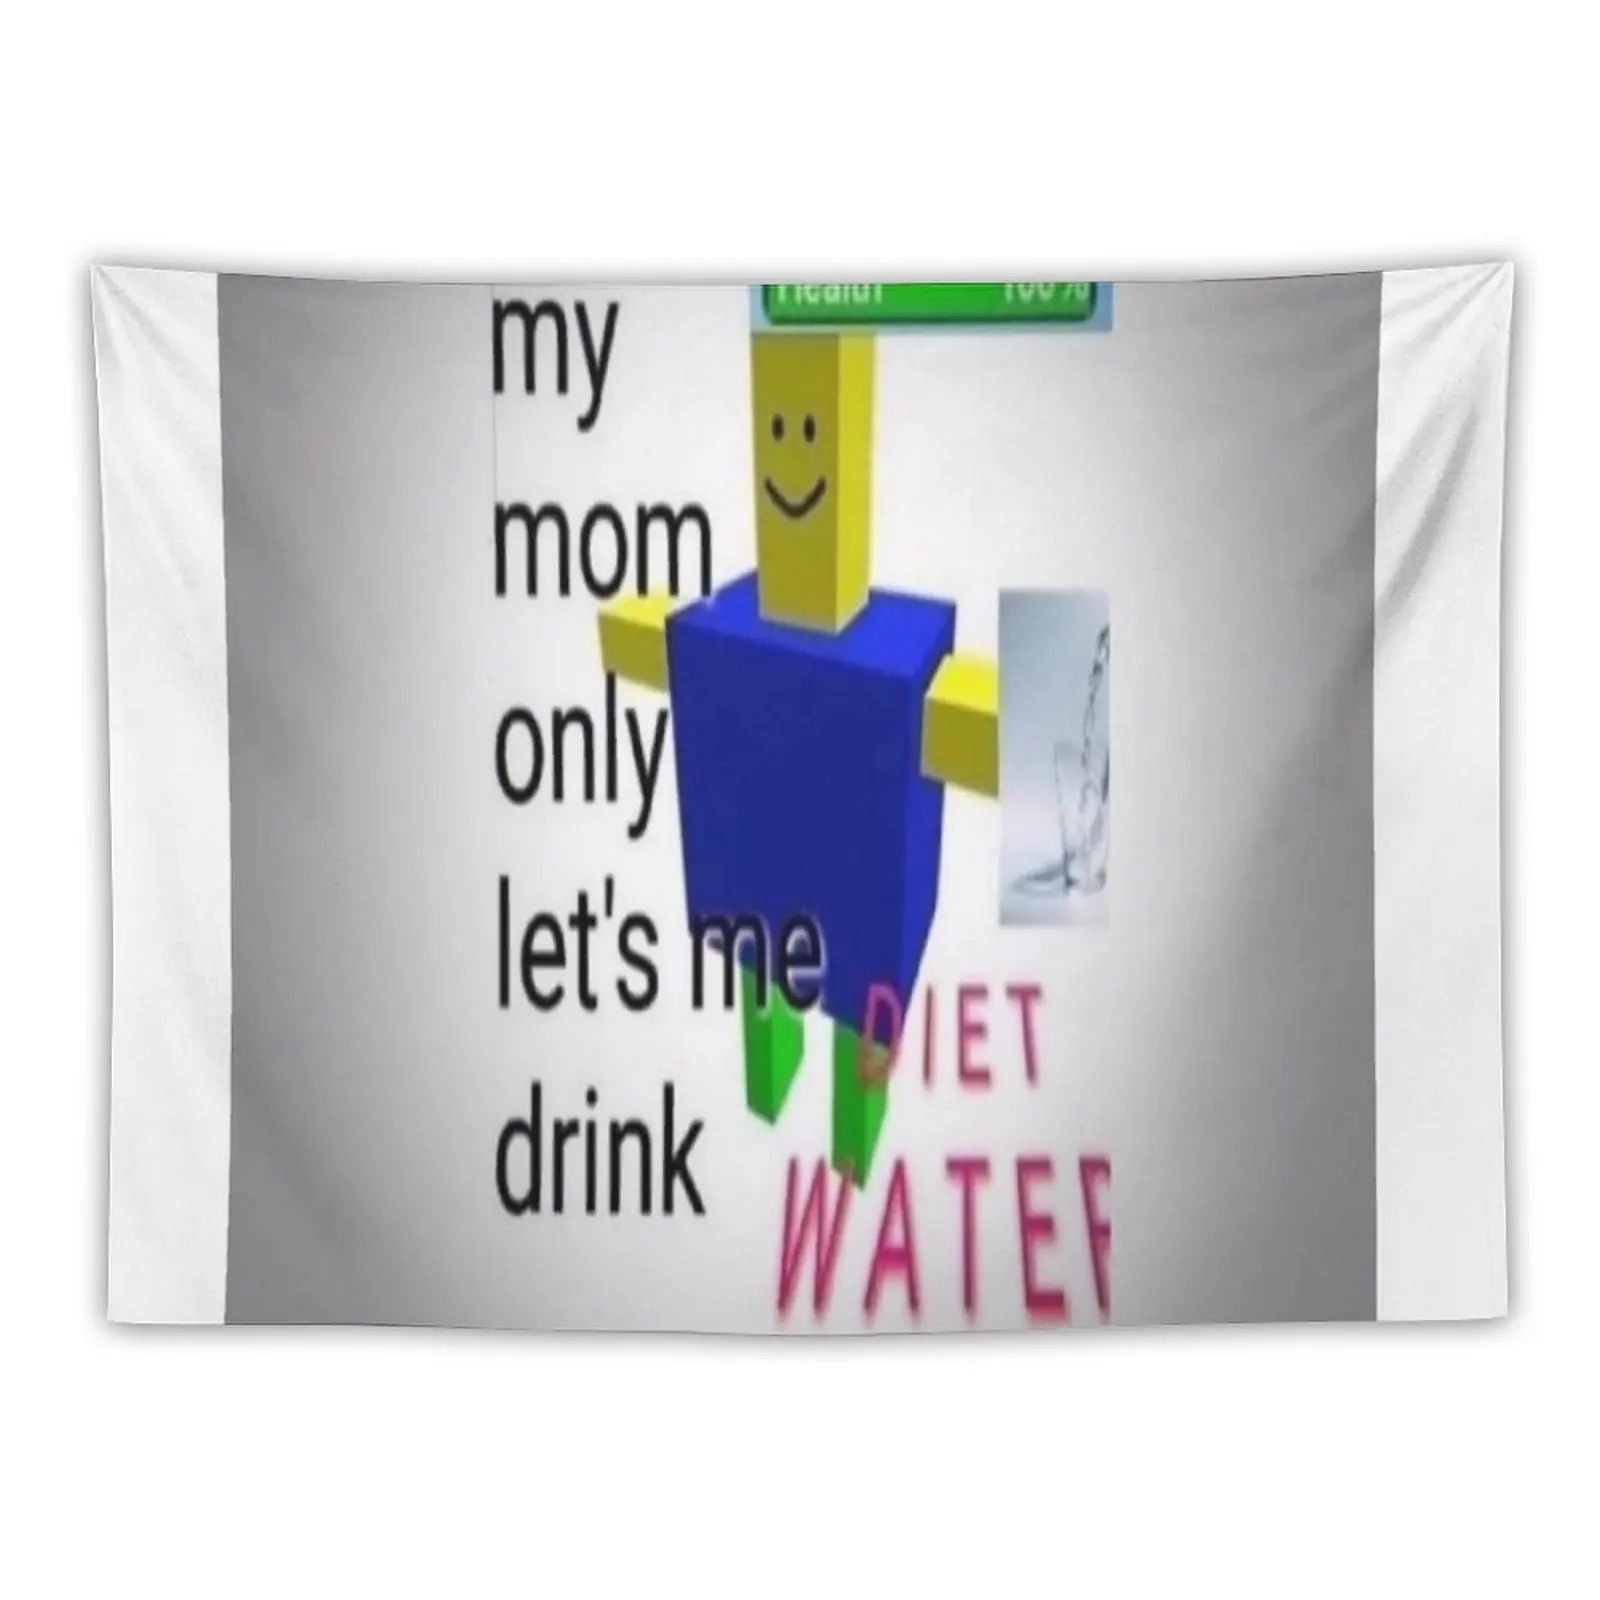 

Diet Water Tapestry Room Aesthetic Wall Hangings Decoration Bedroom Deco Bedrooms Decorations Tapestry